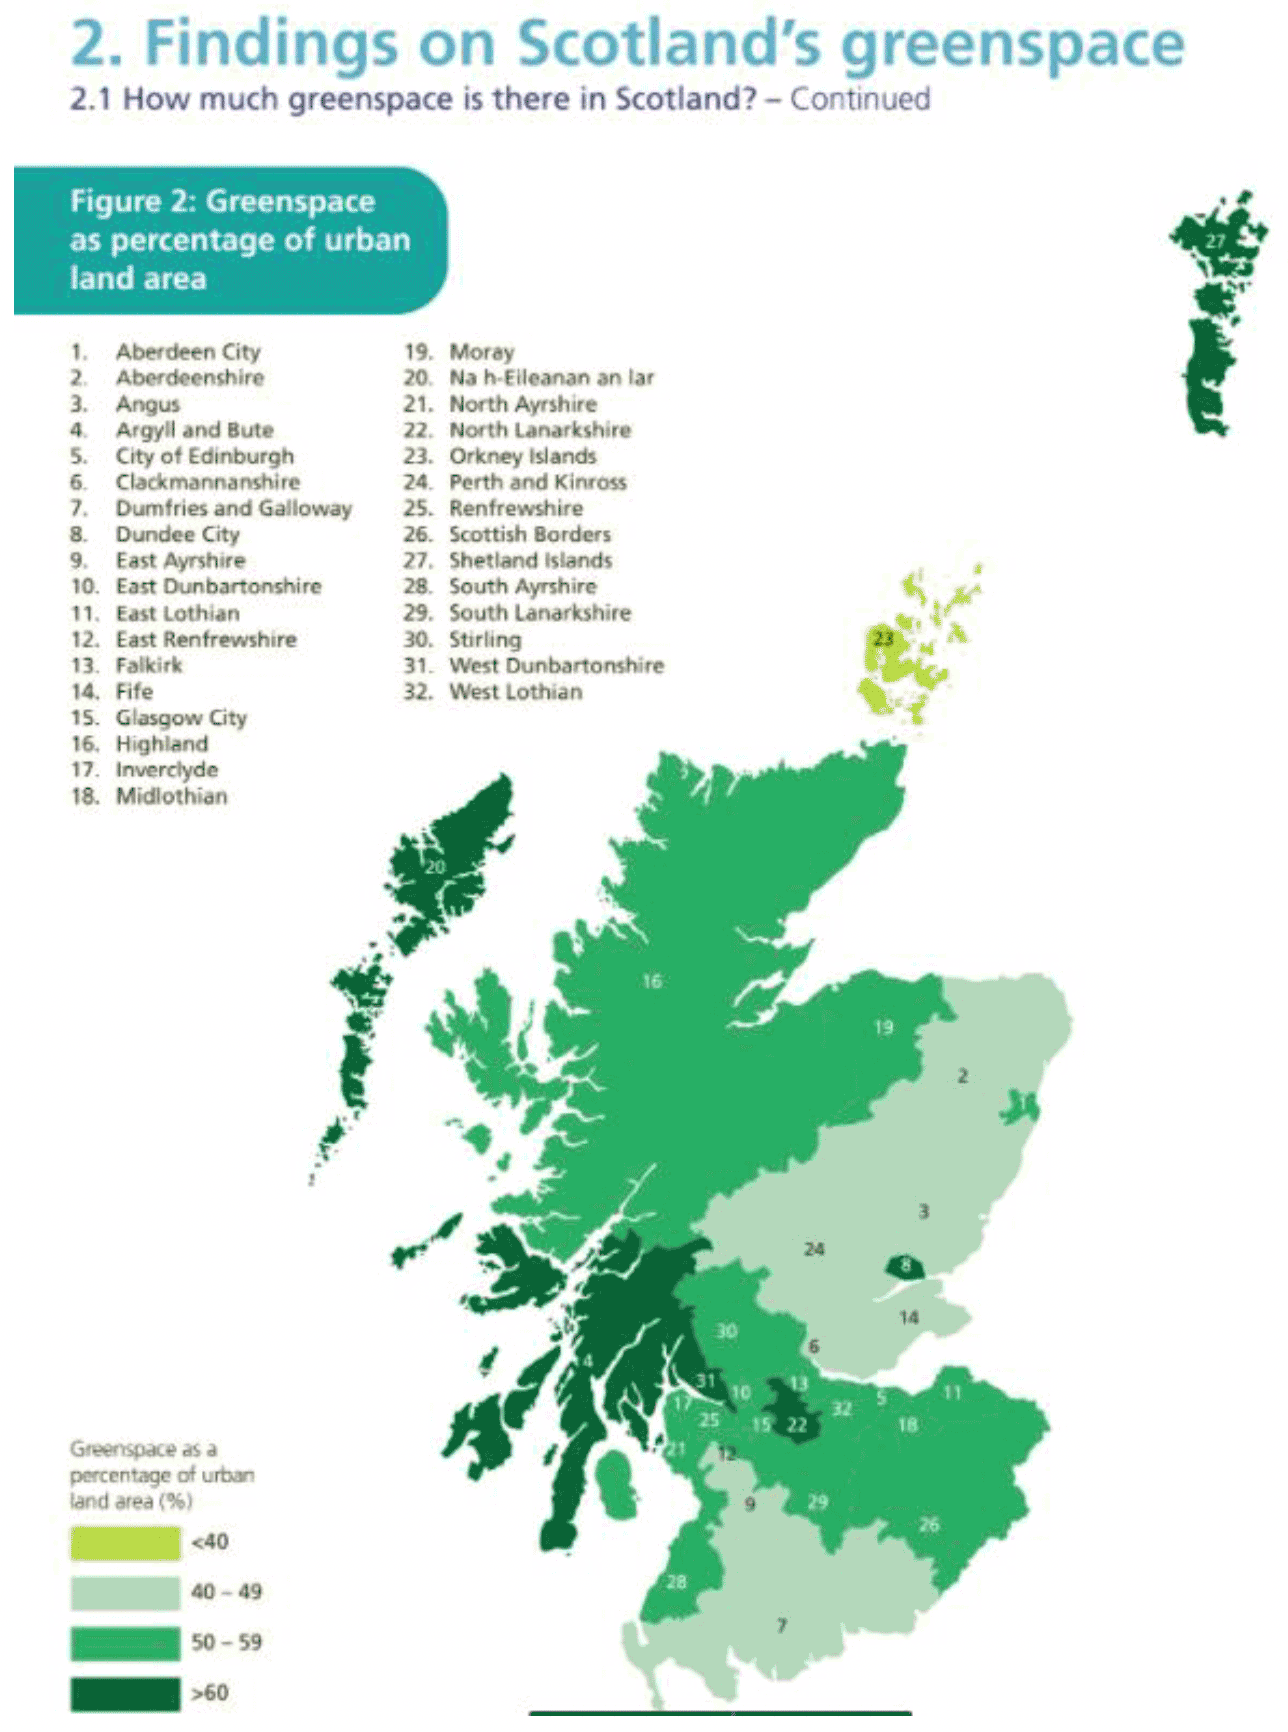 A map from the Third State of Scotland’s Greenspace Report (Feb 2018) showing Greenspace as a percentage of urban land area by local authority area. The map shows that Orkney Islands had the lowest % greenspace <40%.   In Aberdeenshire, Angus, Perth & Kinross, Fife, Clackmannanshire, East Ayrshire and Dumfries and Galloway greenspace formed between 40-49% of the urban land area. In Aberdeen City, City of Edinburgh, Glasgow City, Highland, Moray, Stirling, Falkirk, West Lothian, Midlothian, East Lothian, Scottish Borders, South Lanarkshire, Renfrewshire, East Dunbartonshire, East Renfrewshire, Inverclyde, North Ayrshire and South Ayrshire, greenspace formed between 50-59% of the urban land area. The areas with the highest %  (>60%) of urban land area being greenspace were Dundee City, Shetland Islands, Na h-Eileanan an Iar, Argyll and Bute, North Lanarkshire and West Dunbartonshire.